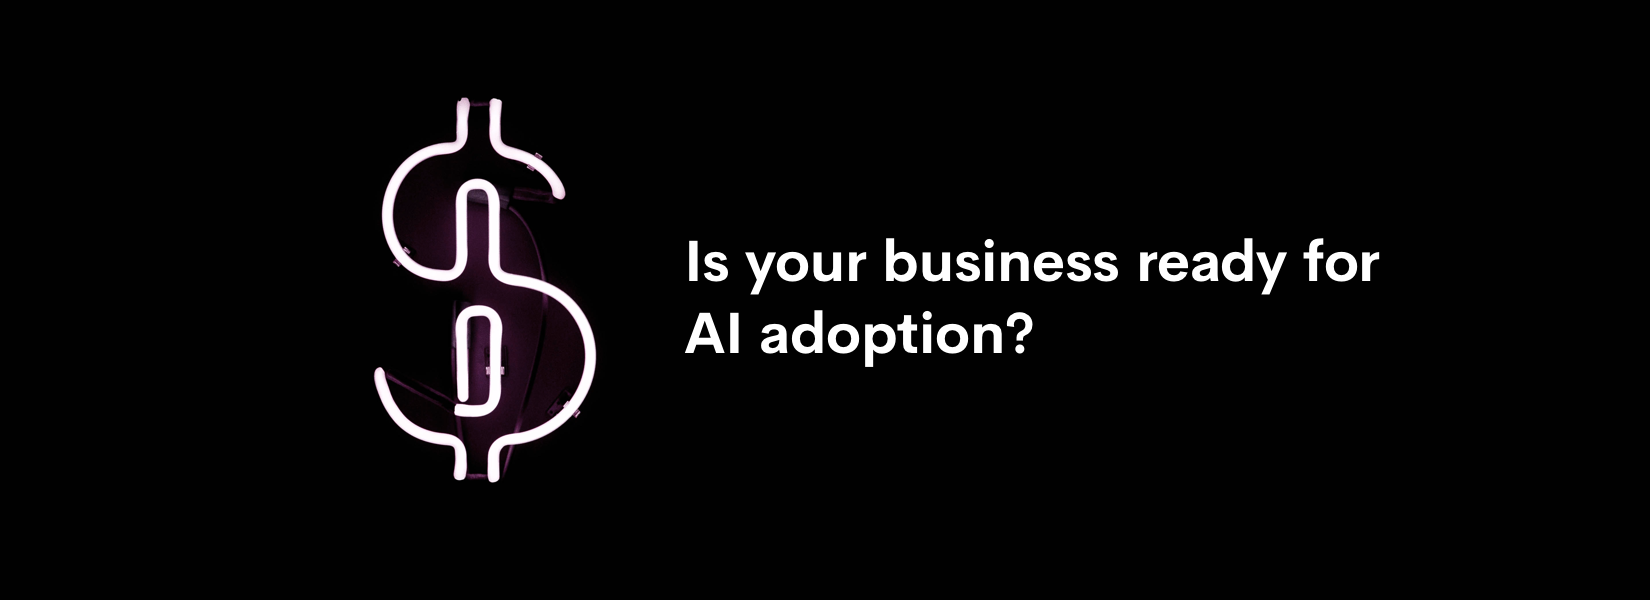 Is your business ready for AI adoption?